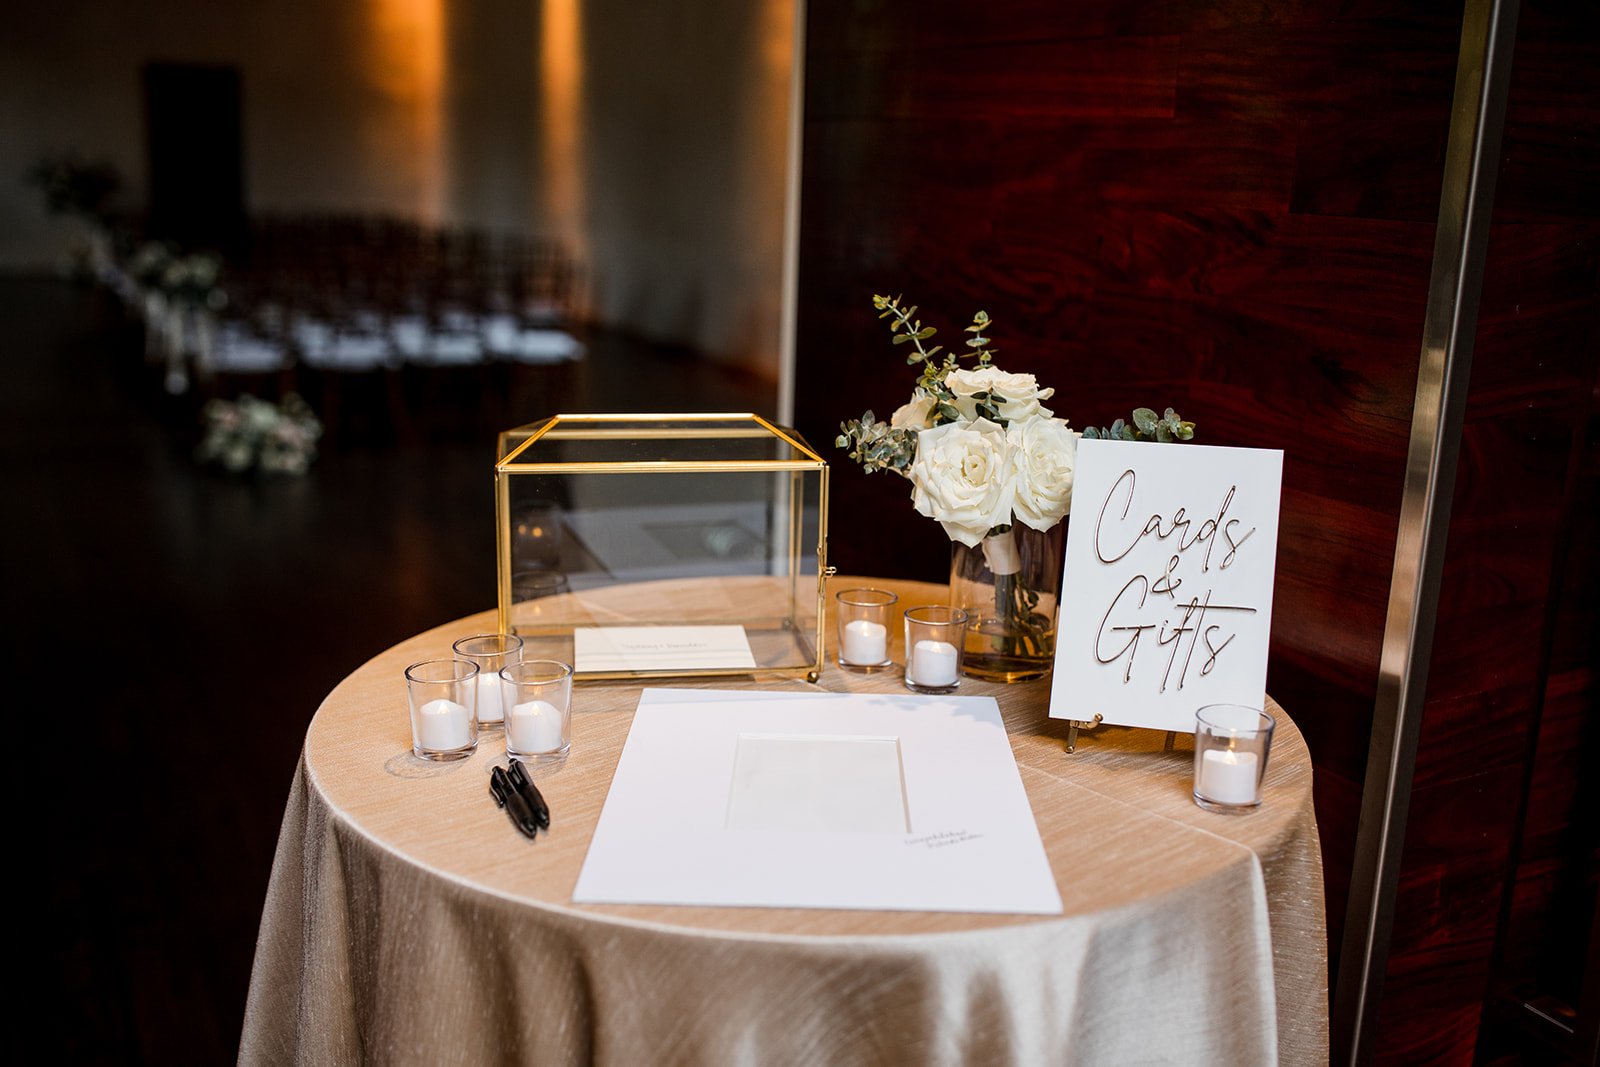 Gifts + Cards💌

Venue: @rubynashville 
Photography: @johnmyersphotography 
Florals: @lma__designs